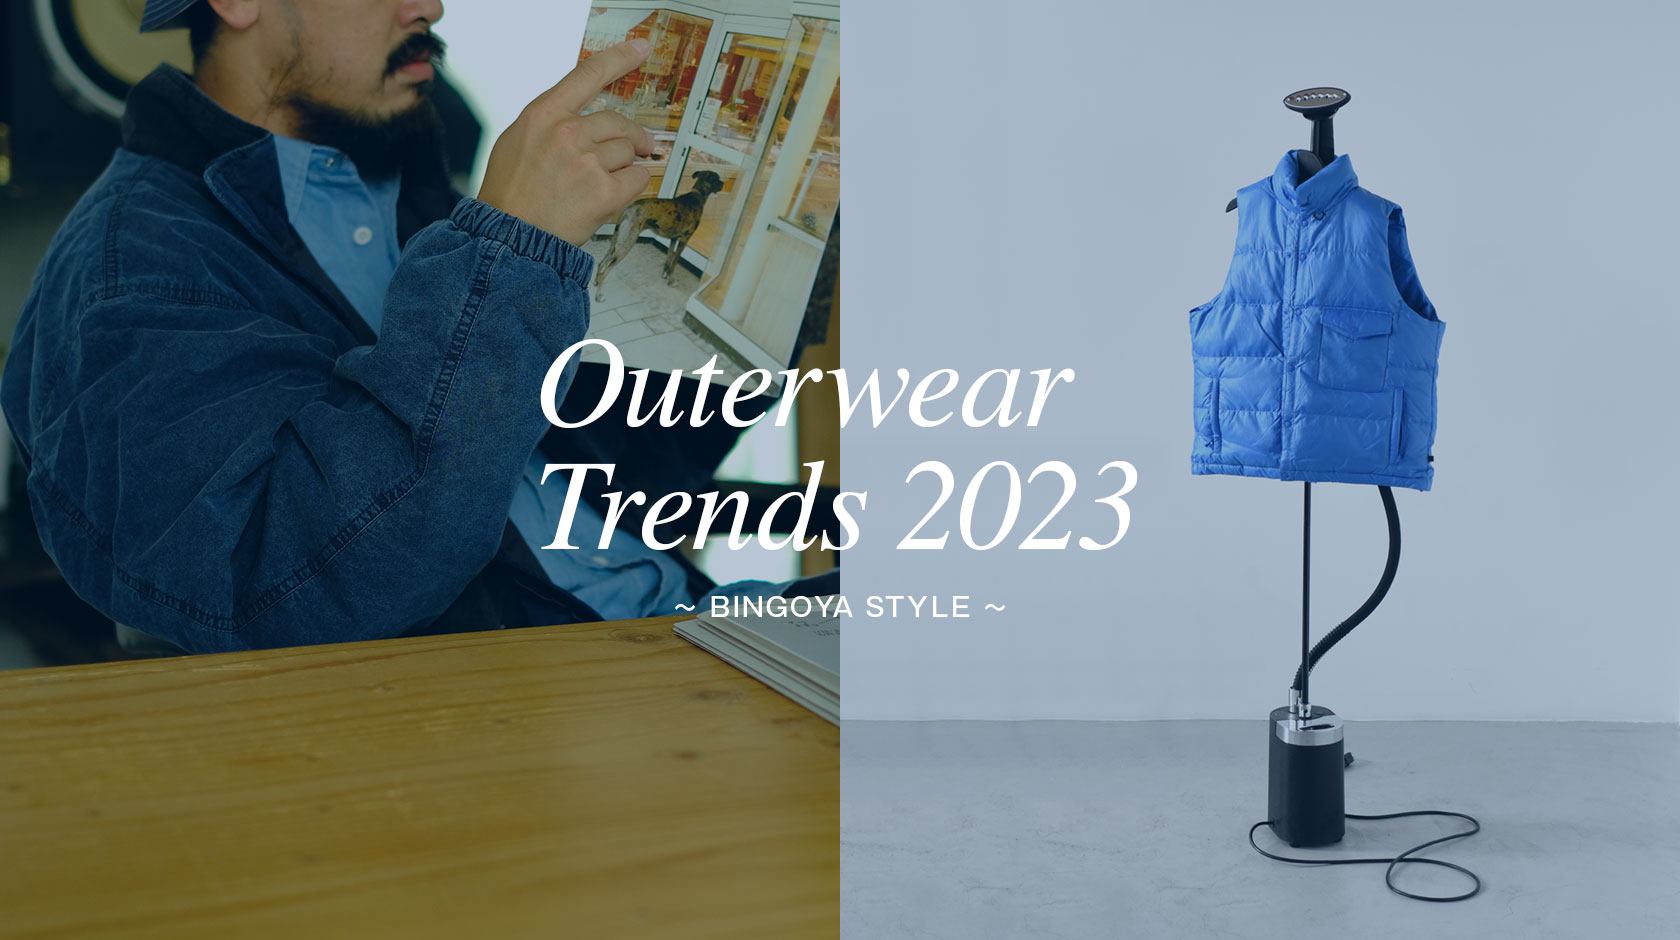 Outerwear Trends 2023